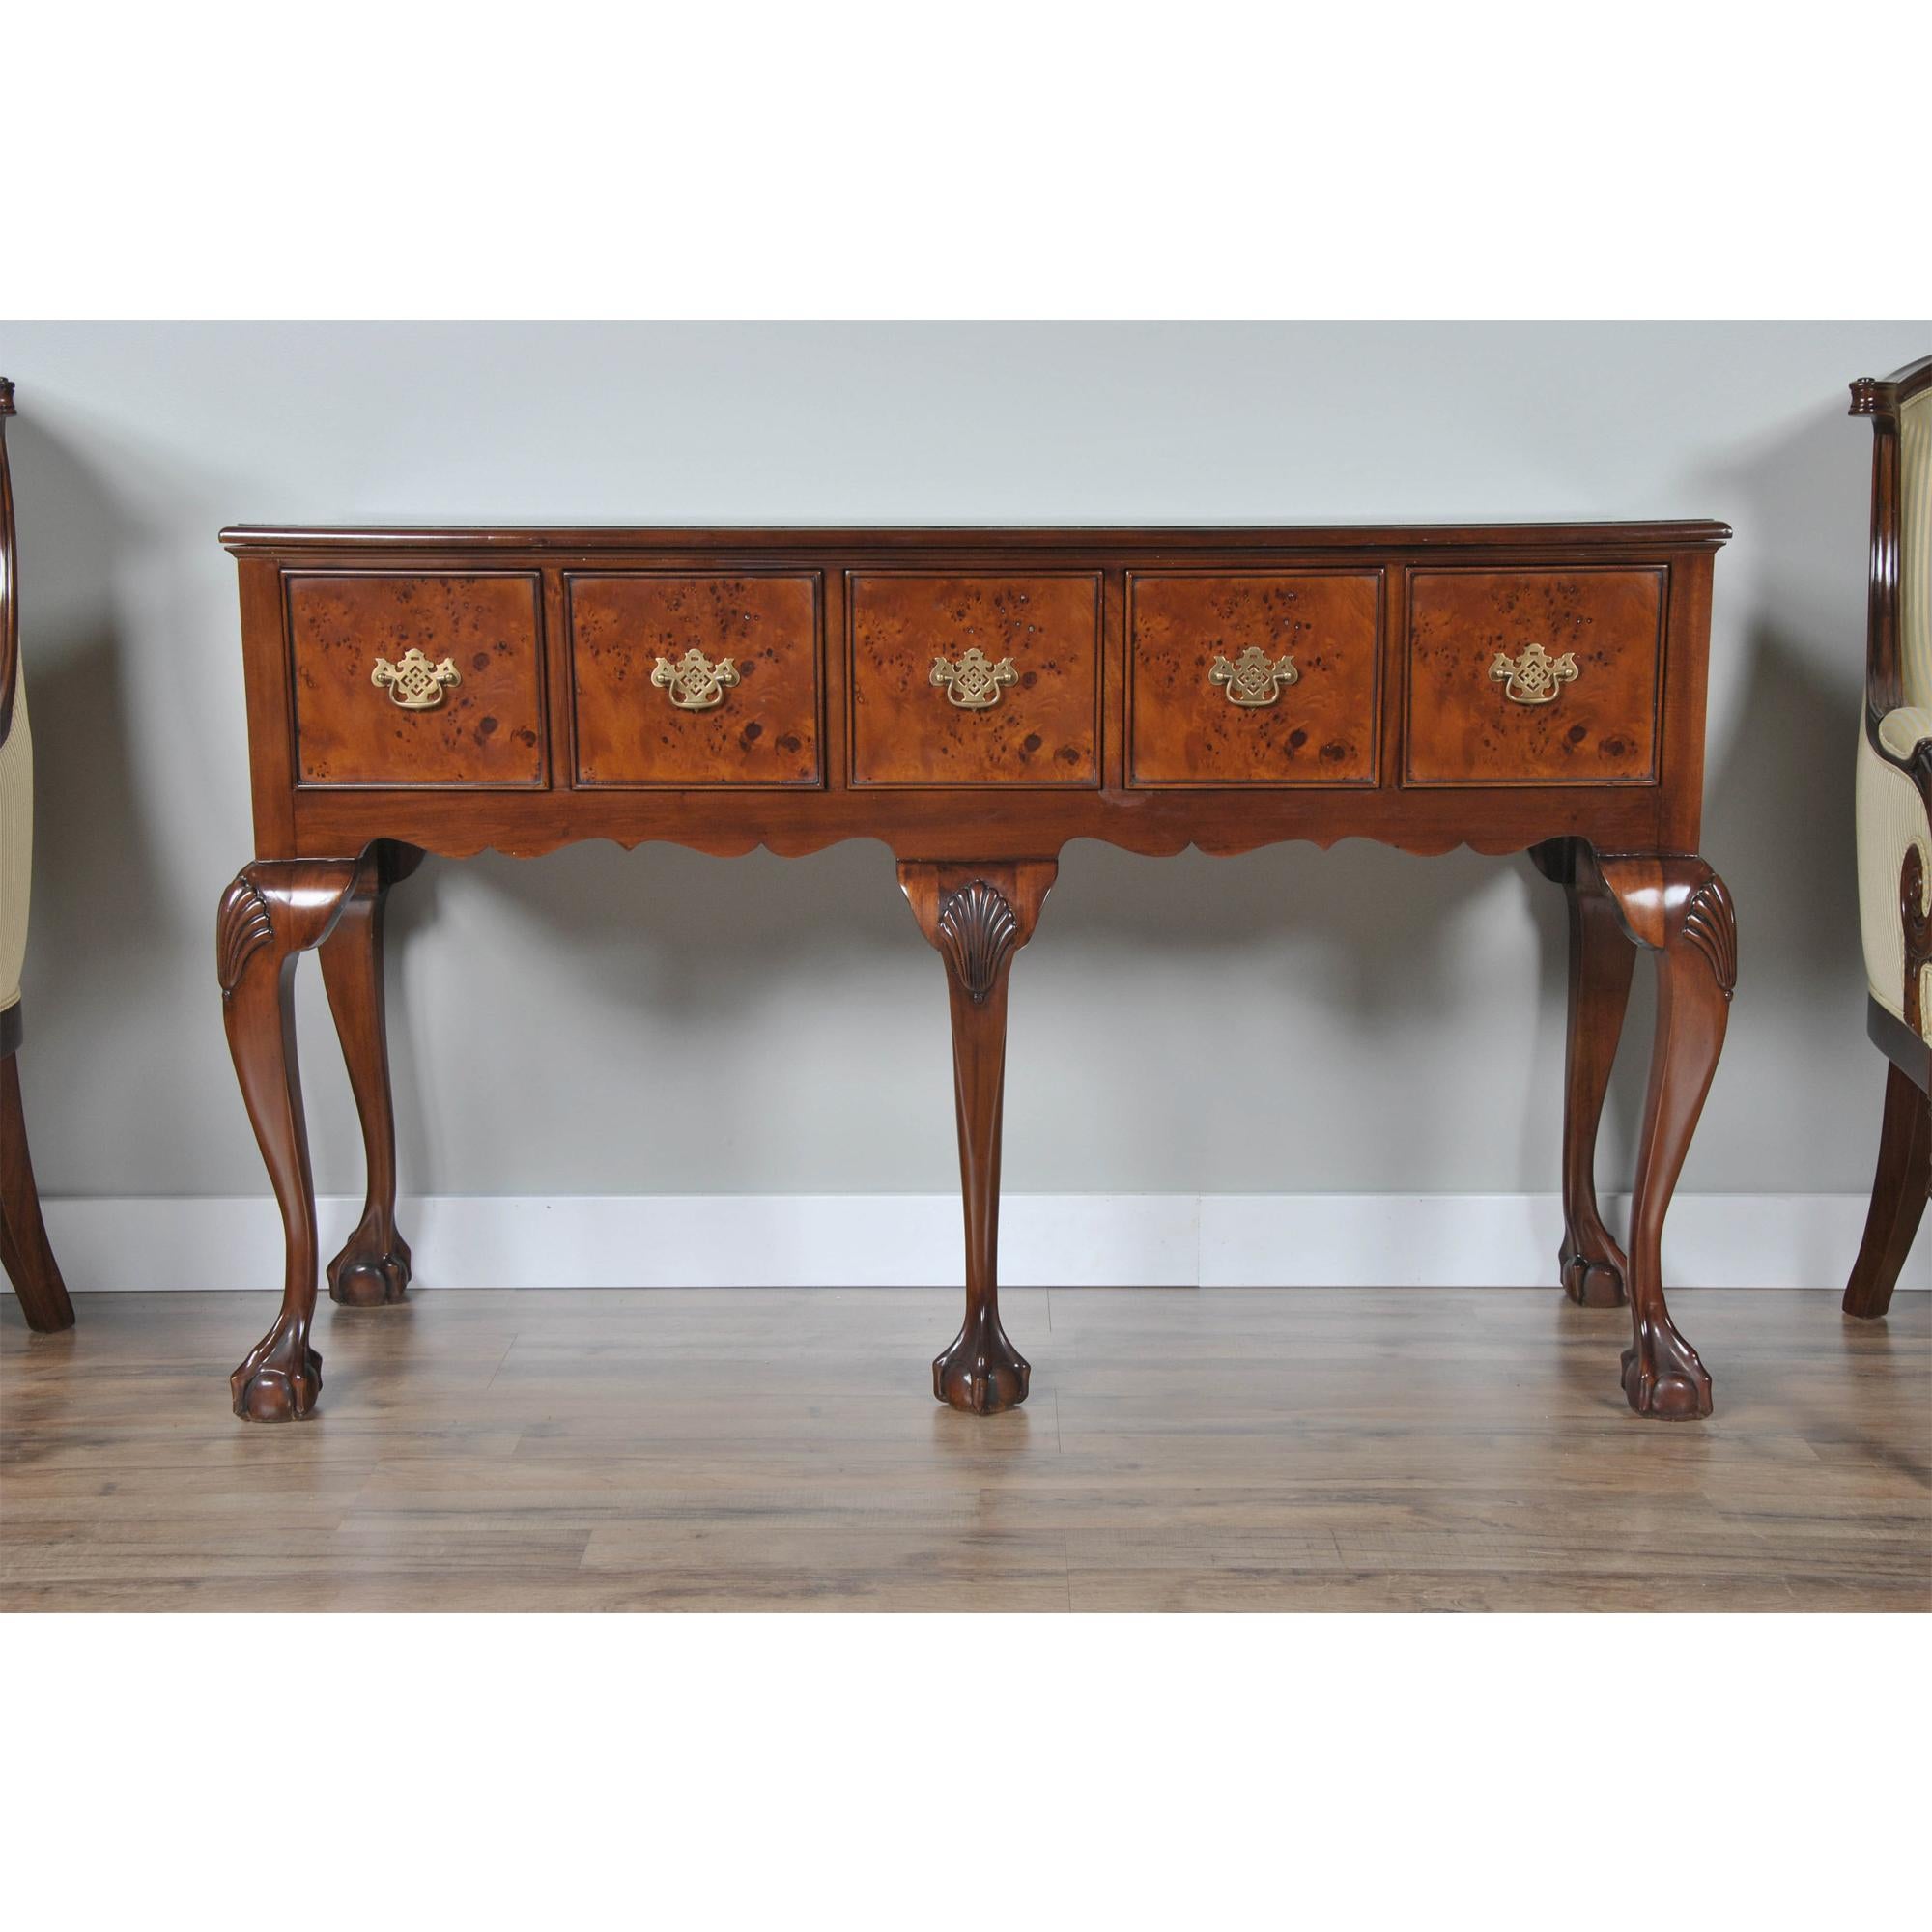 The Burled Hunt Board.  This classic style of sideboard or buffet is often also referred to as a hunt board, especially in the southern United States and England as it was narrow enough to be used in hallways. Narrow in depth the raised leg